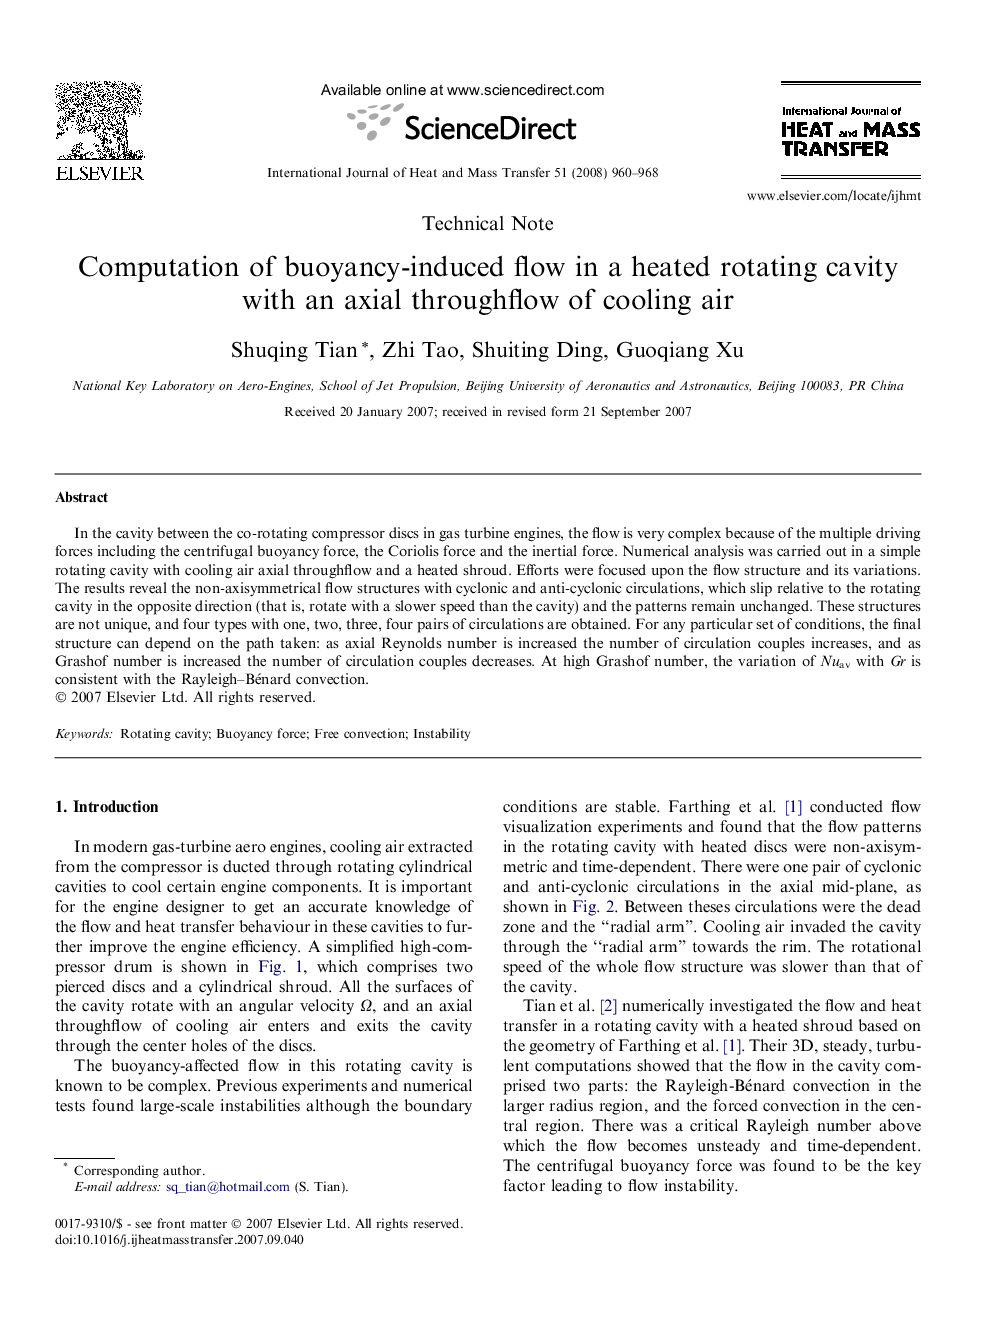 Computation of buoyancy-induced flow in a heated rotating cavity with an axial throughflow of cooling air